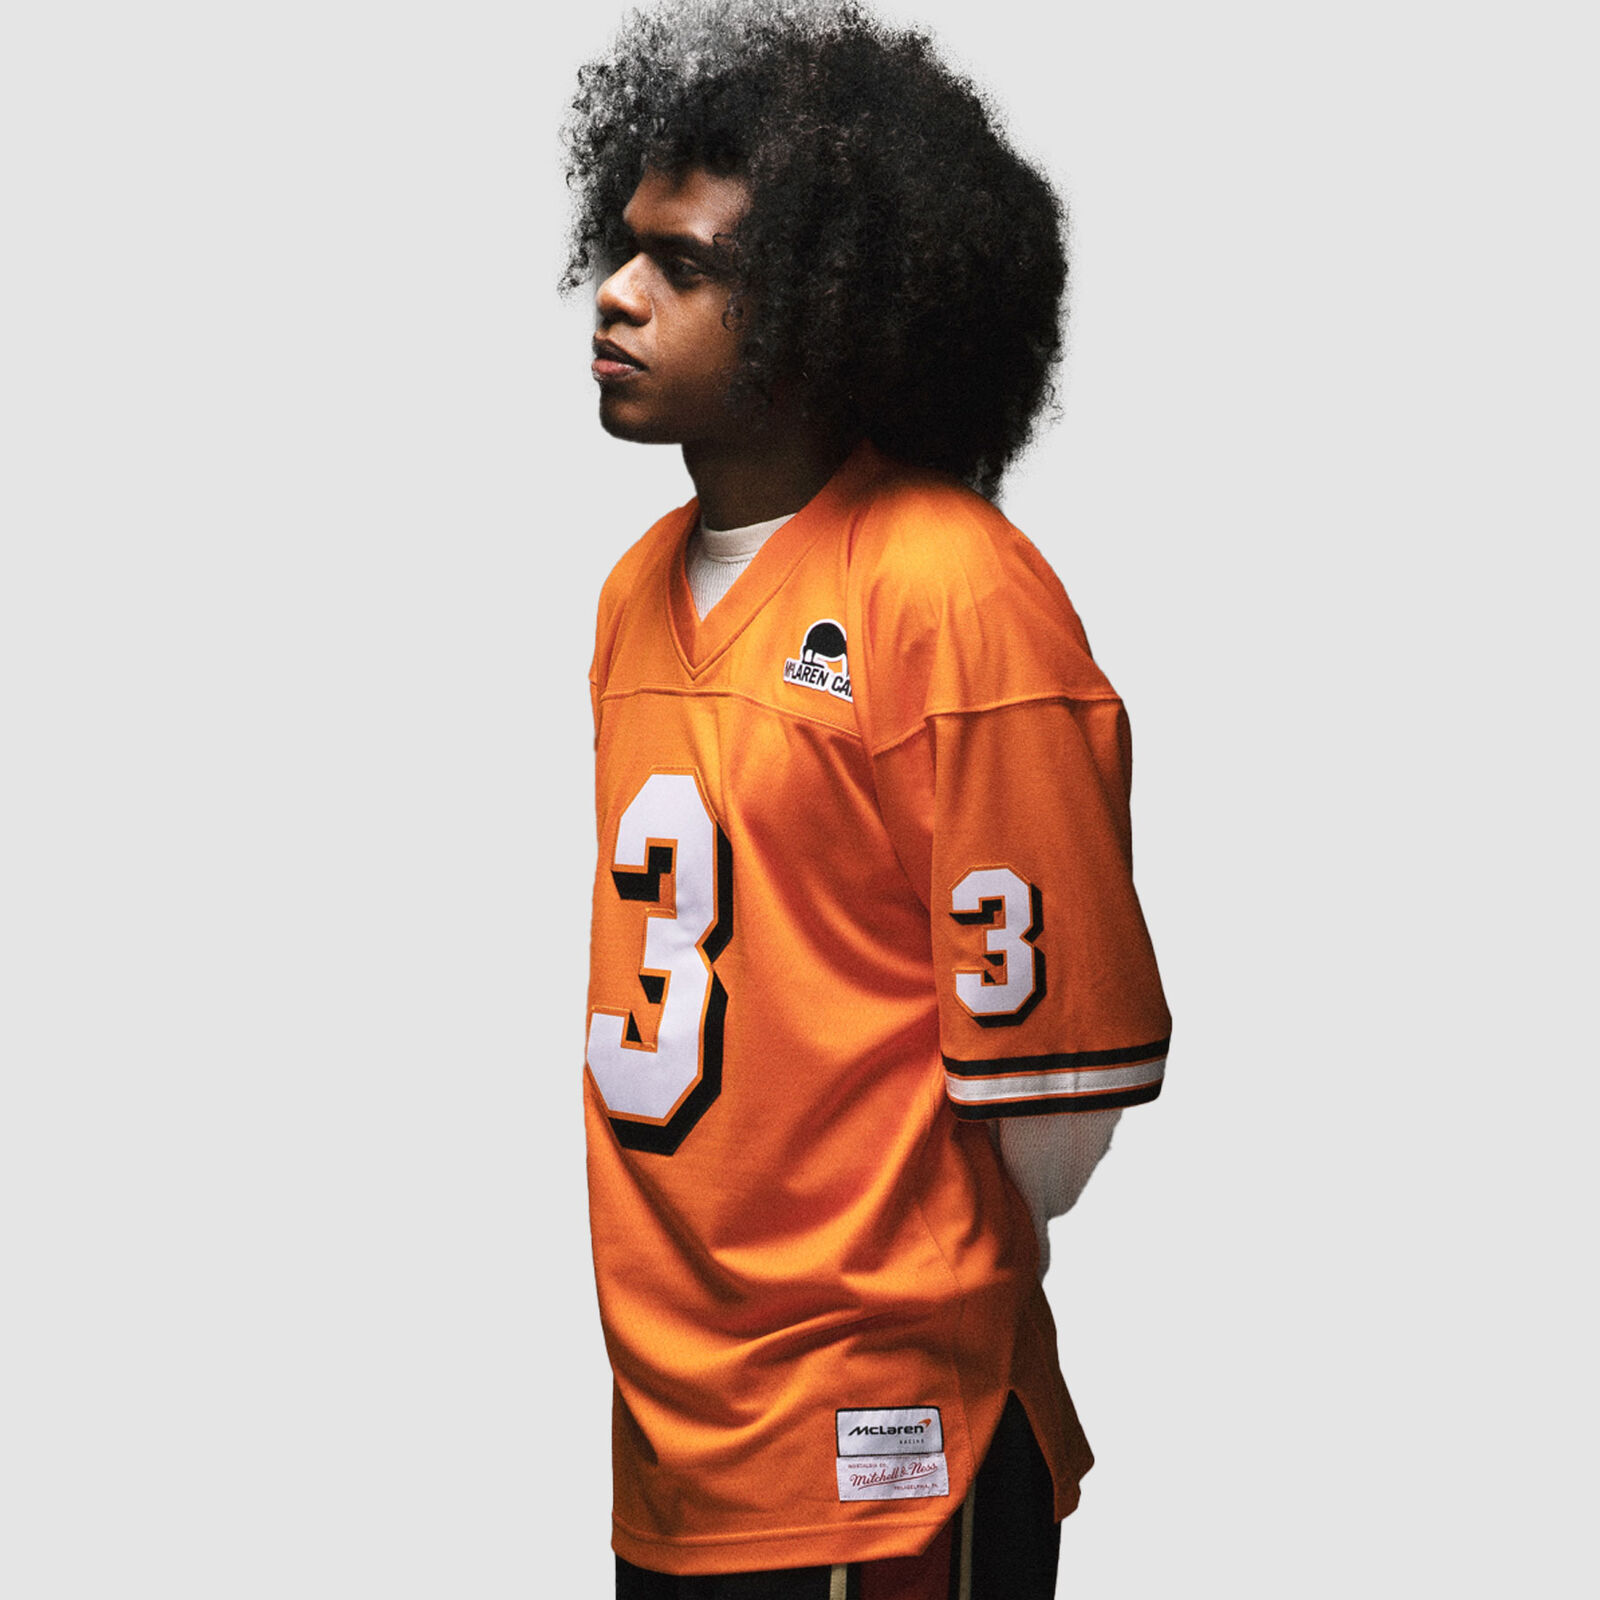 mitchell and ness nfl jersey sizing